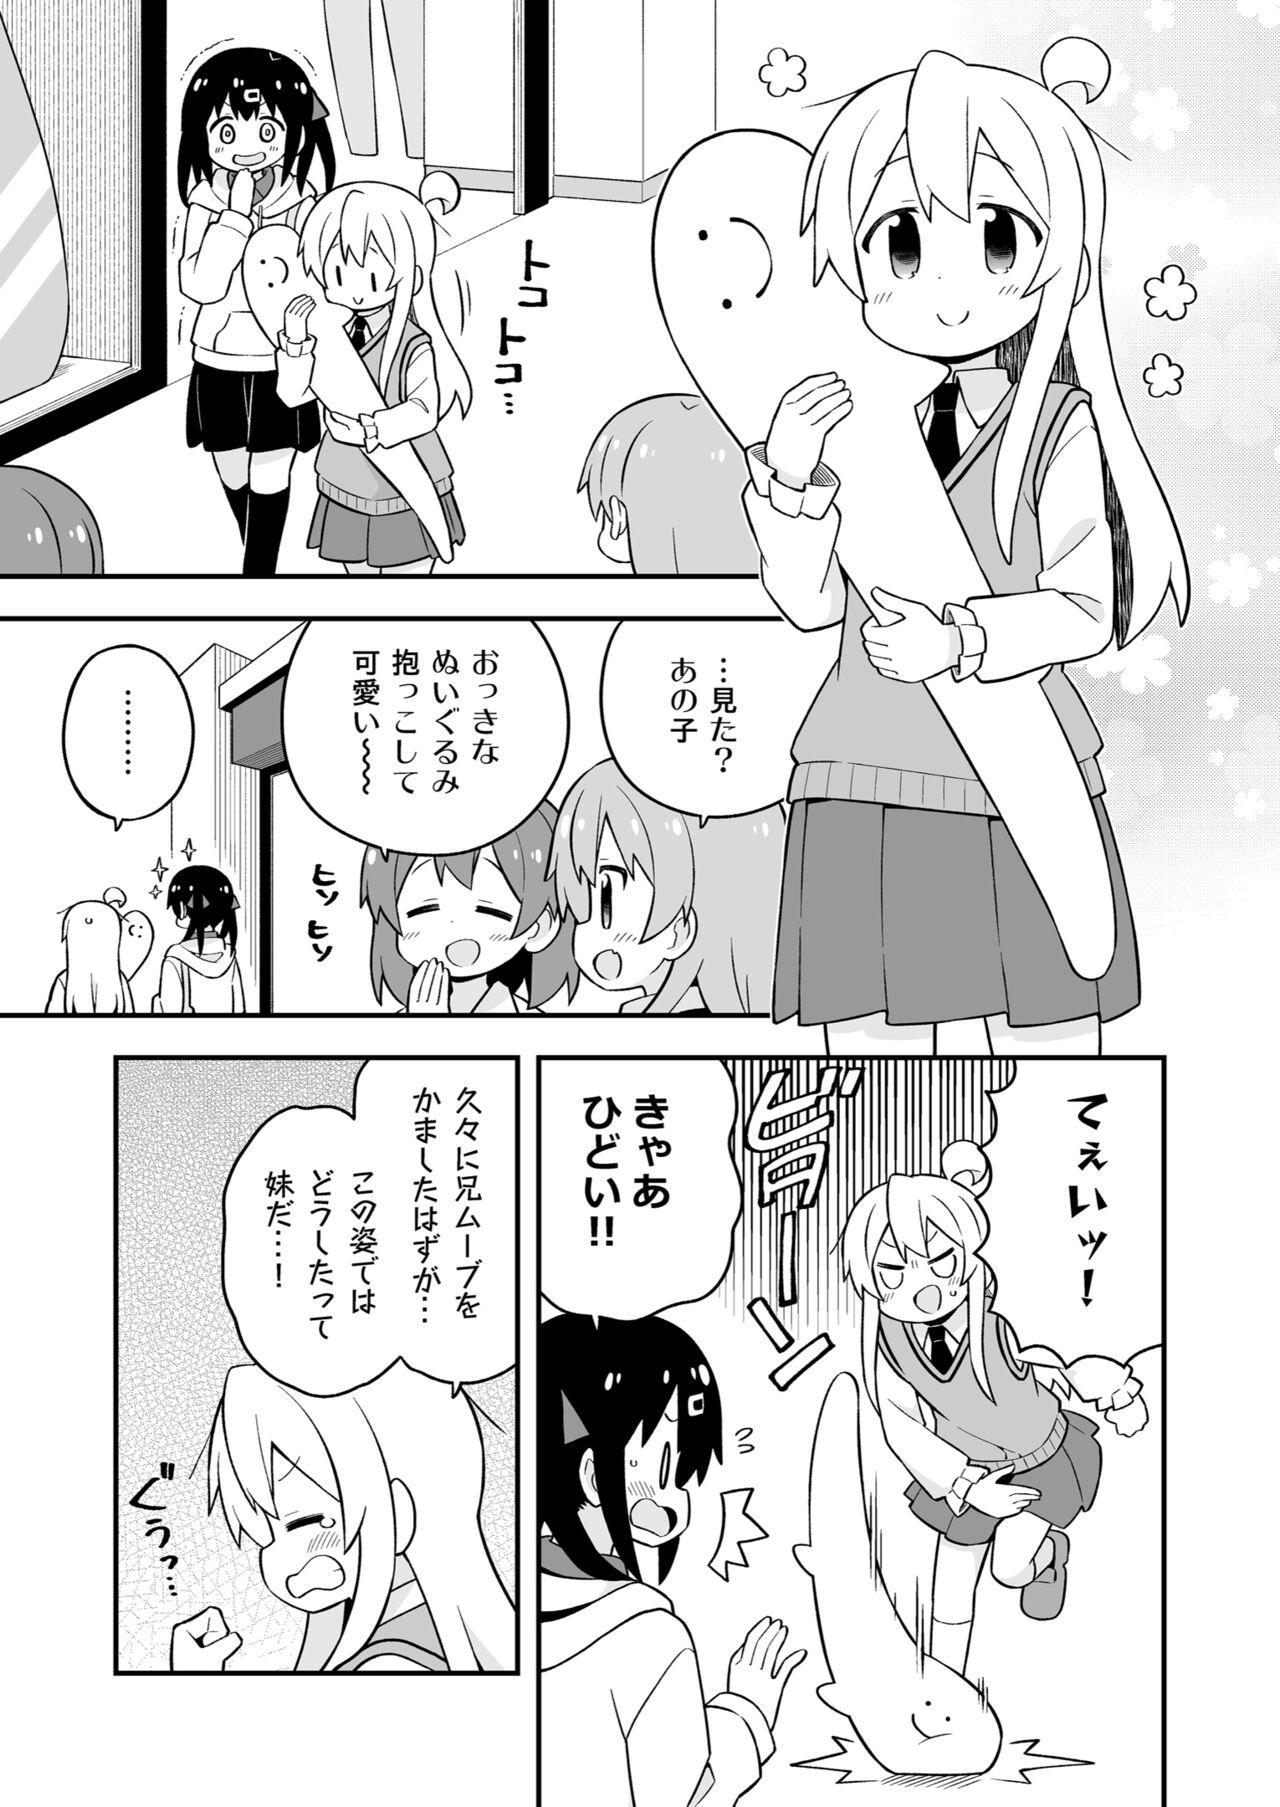 Long Onii-chan wa Oshimai! 23 - Onii chan wa oshimai Naturaltits - Page 7